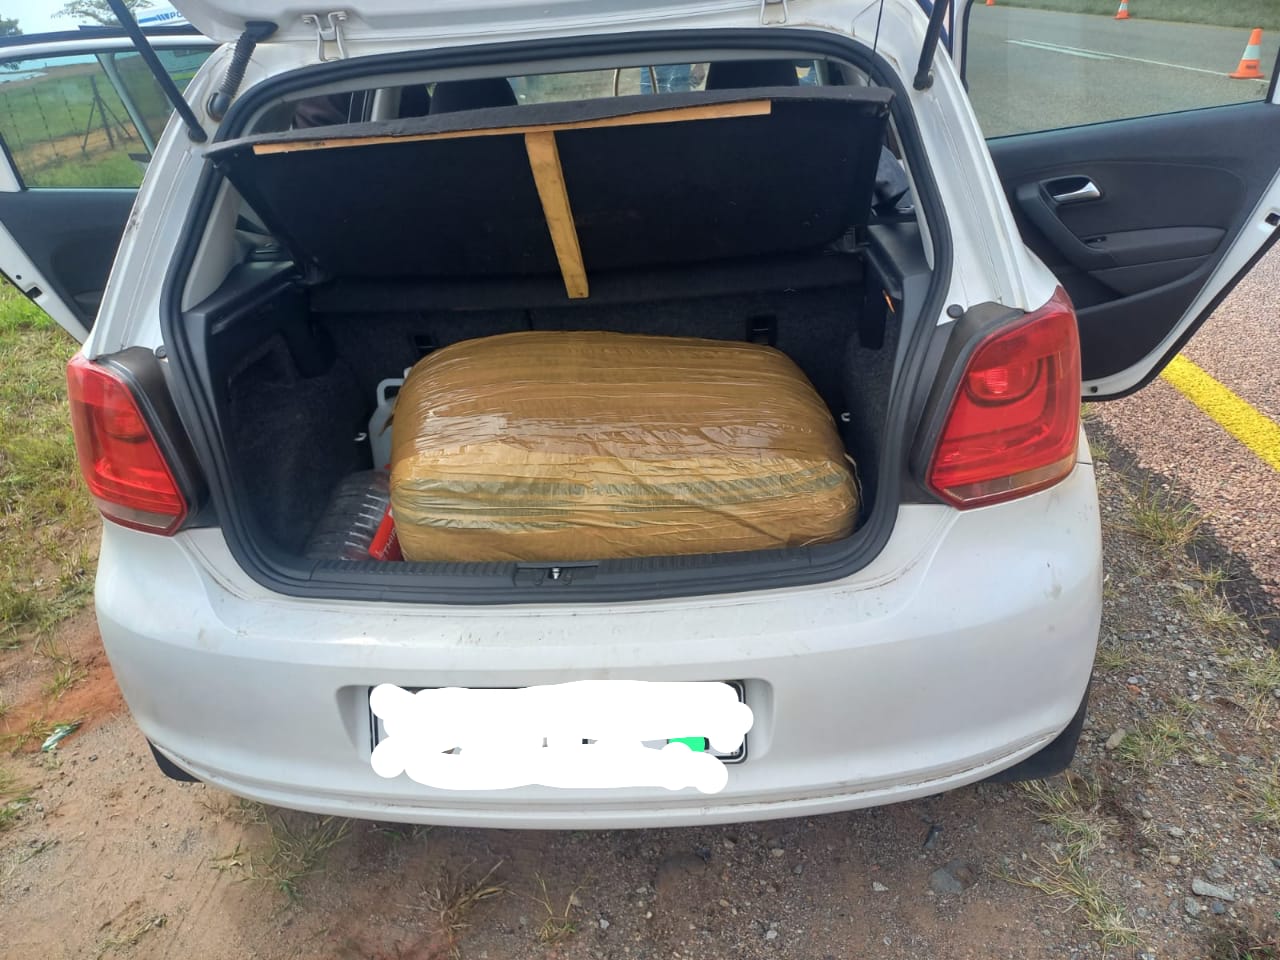 Burgersfort police nabbed three suspects including a 46-year-old police officer for alleged possession and transportation of dagga